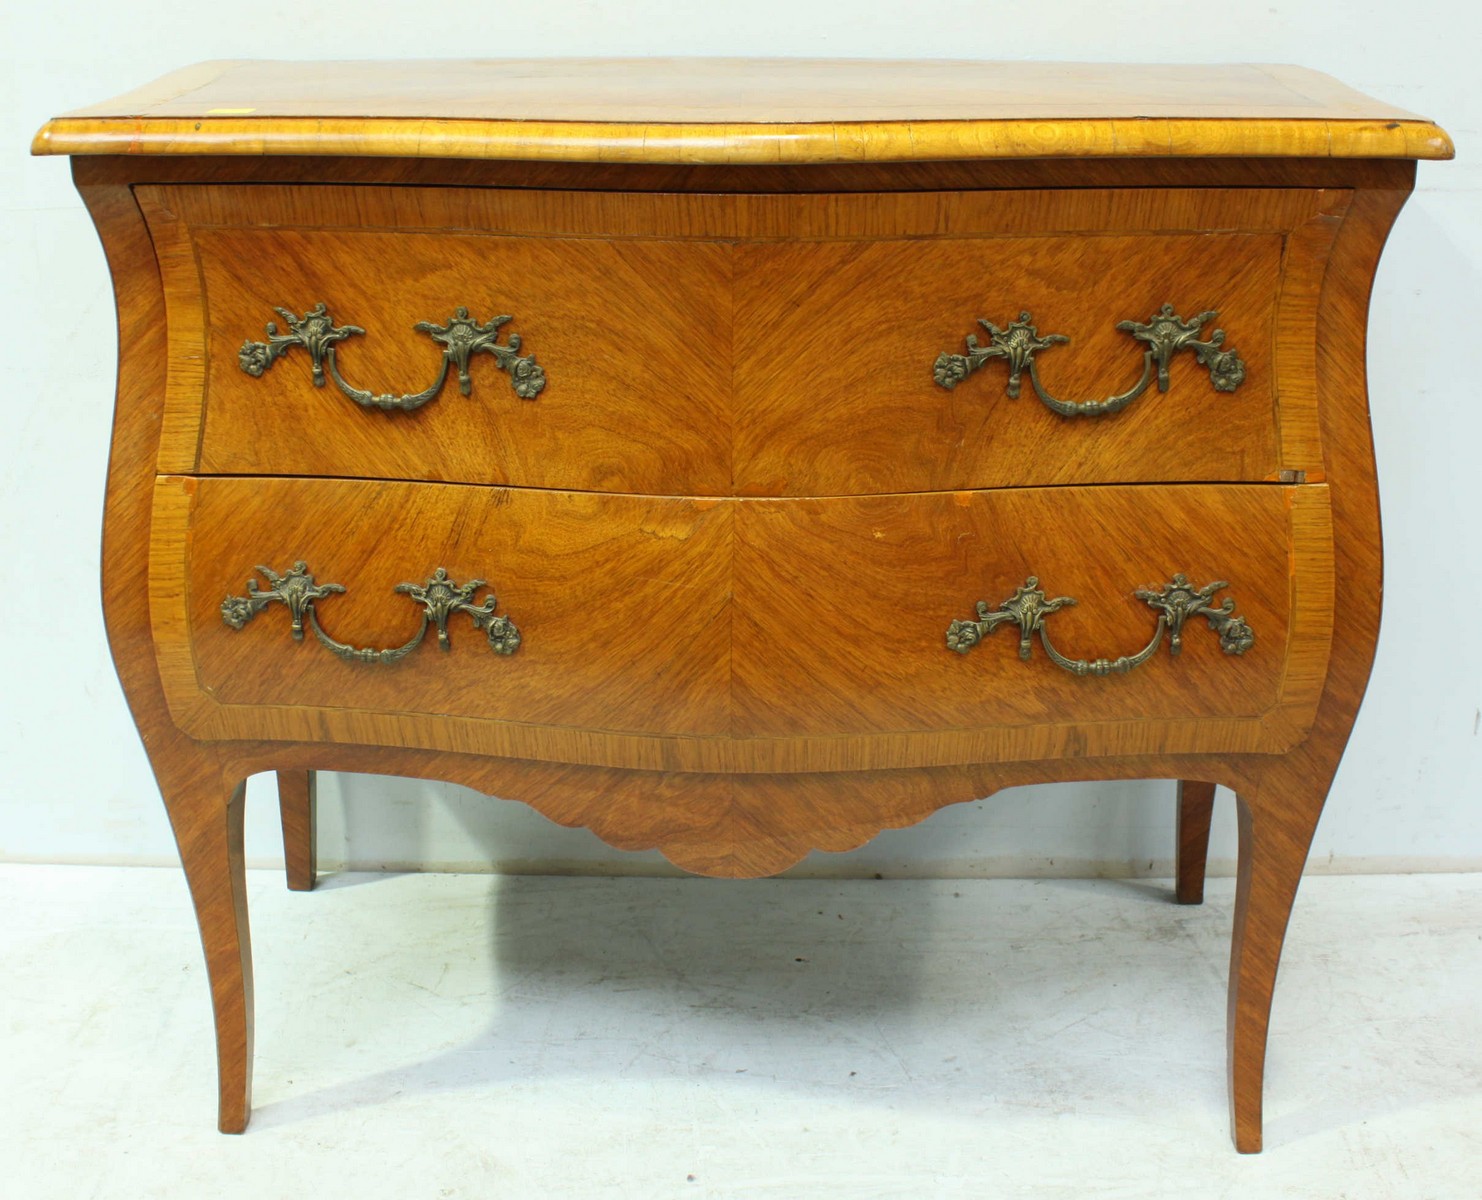 An early 20th century French kingwood parquetry veneered bombe commode, with serpentine front and